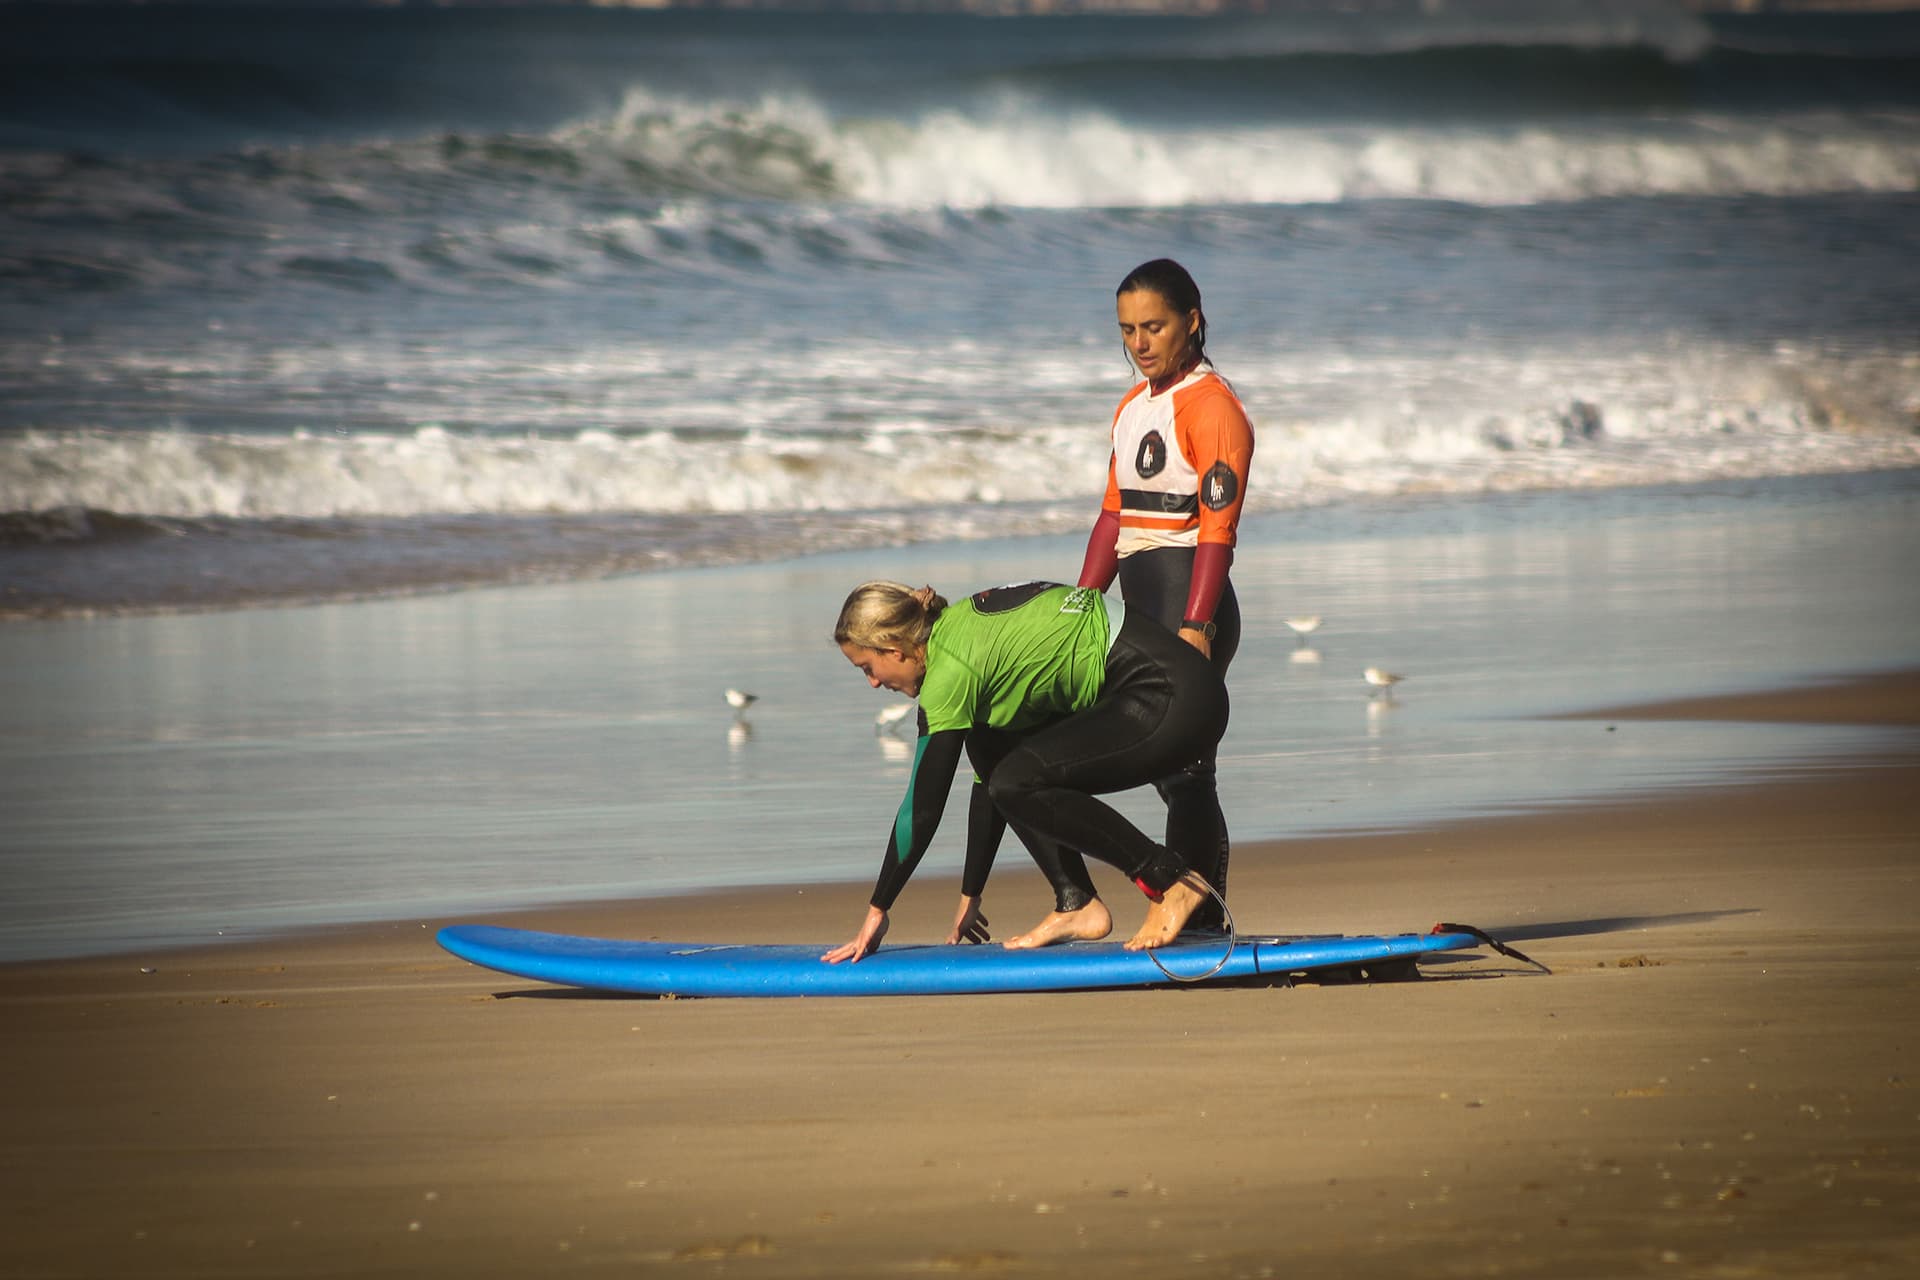 surf lessons near me 